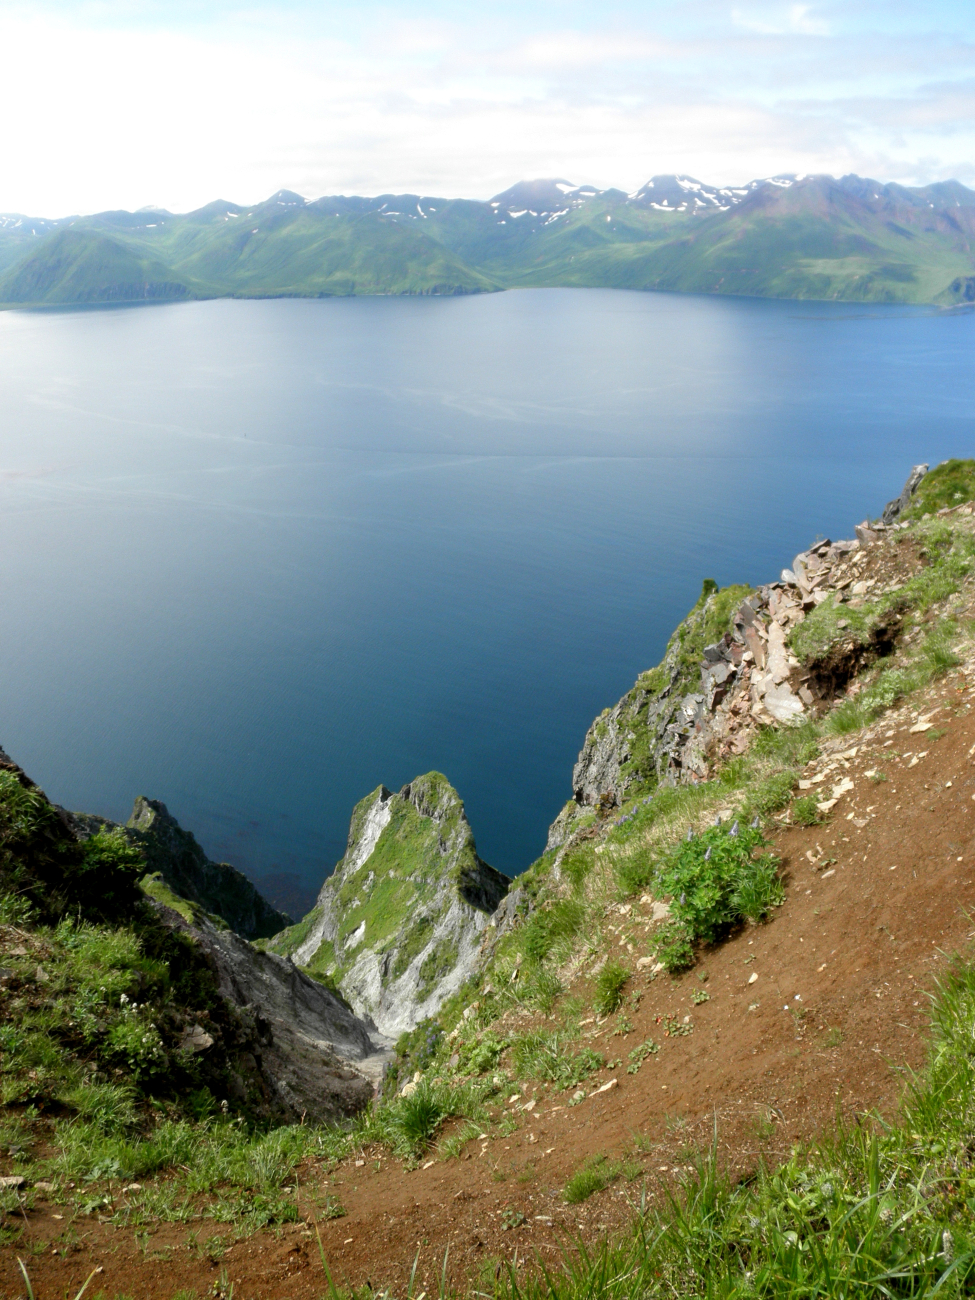 Looking down from an Aleutian cliff to the sea below